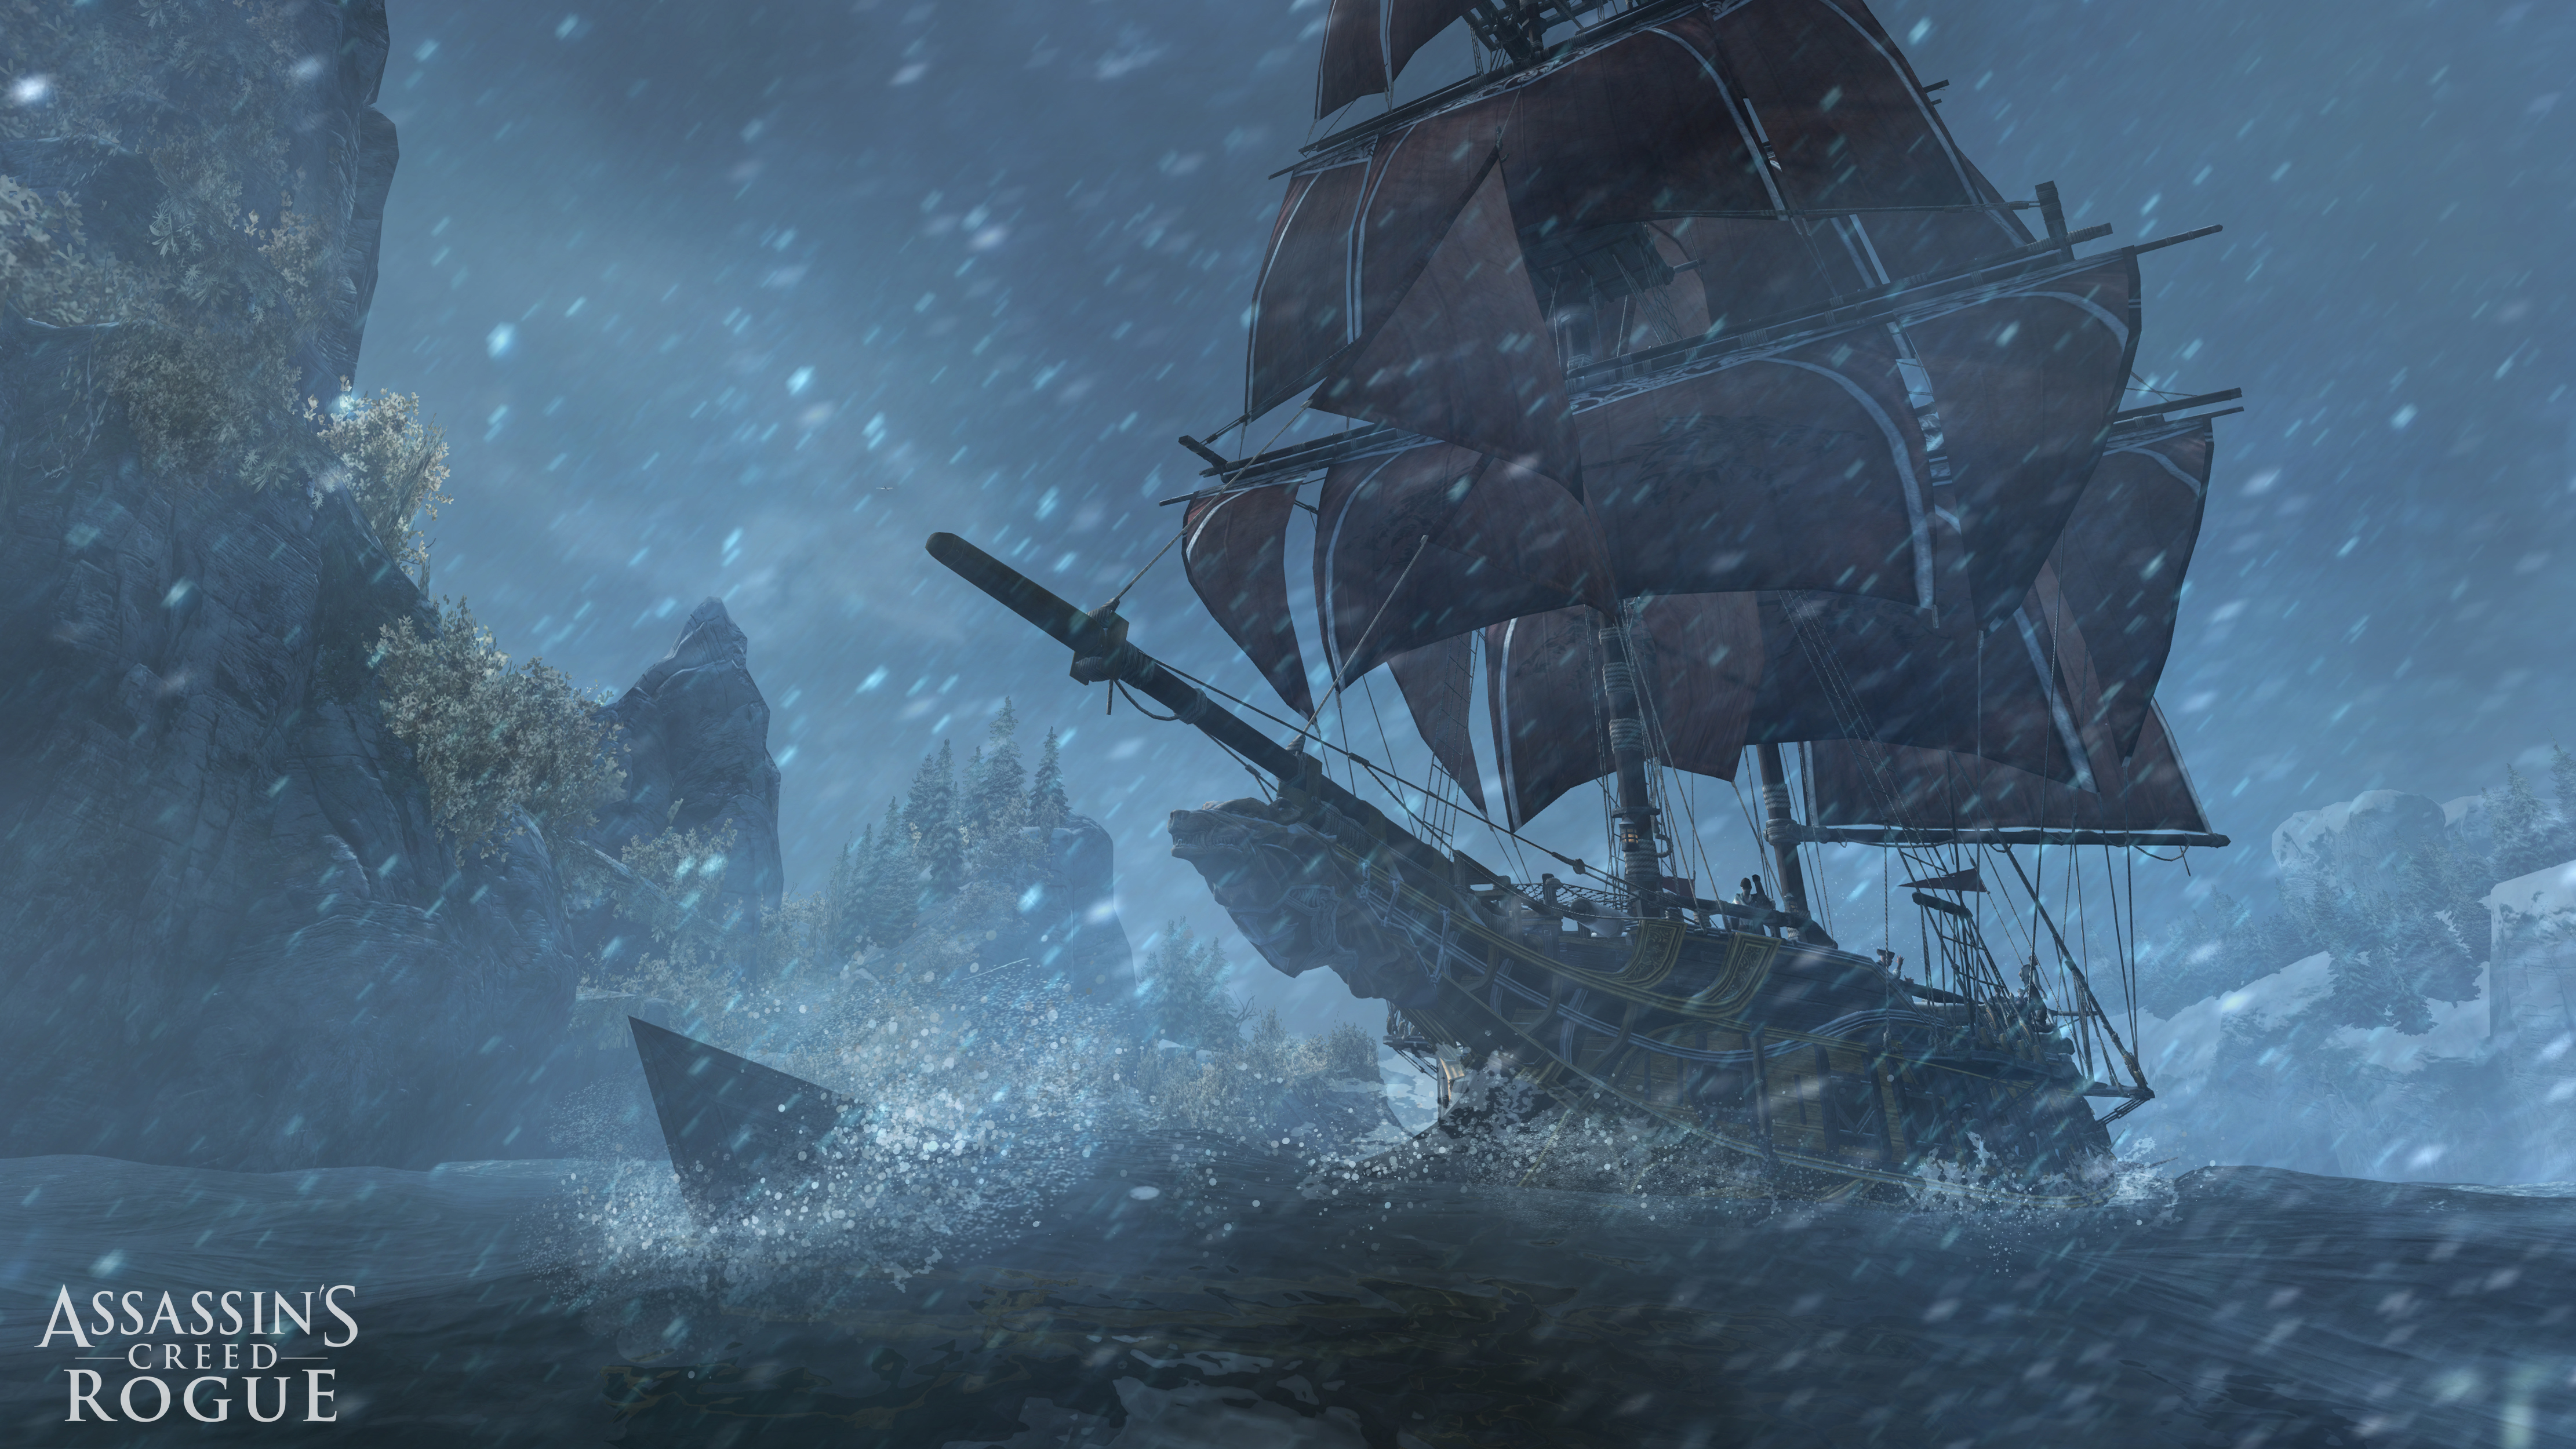 Assassin's Creed Rogue Gallery #12